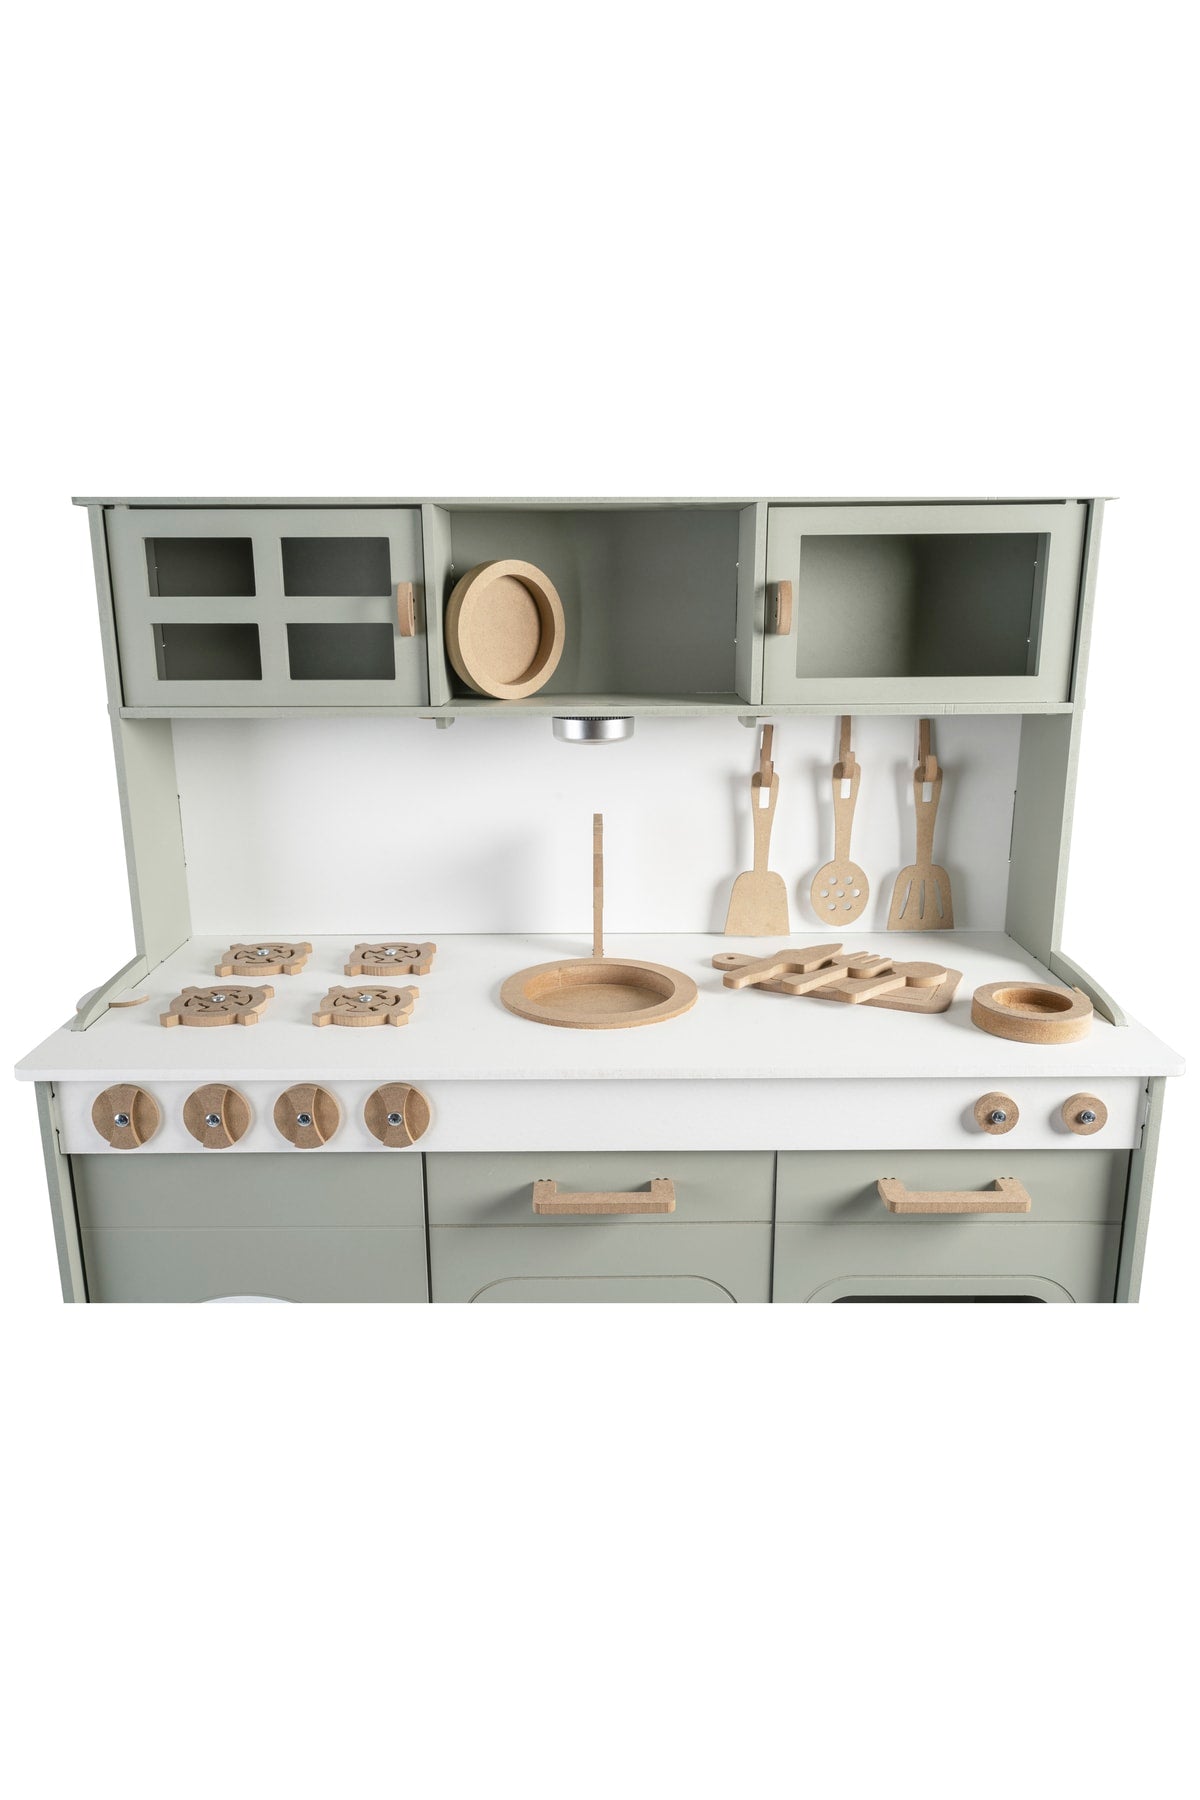 Painted Wooden Toy Kitchen Service Set And 1 Led Lighting